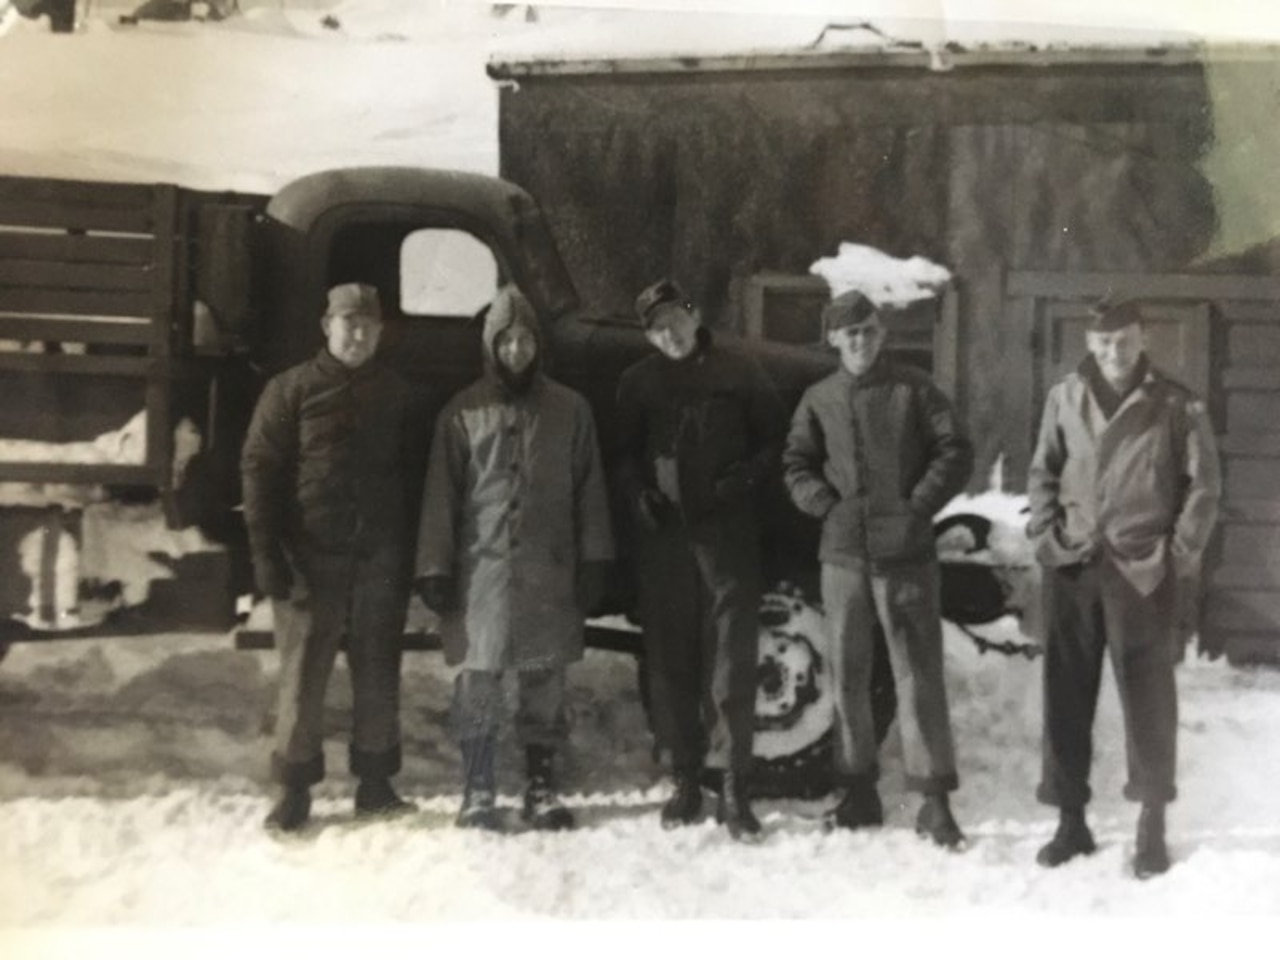 Five World War II Army soldiers stand in the snow in front of an old truck and a small building.